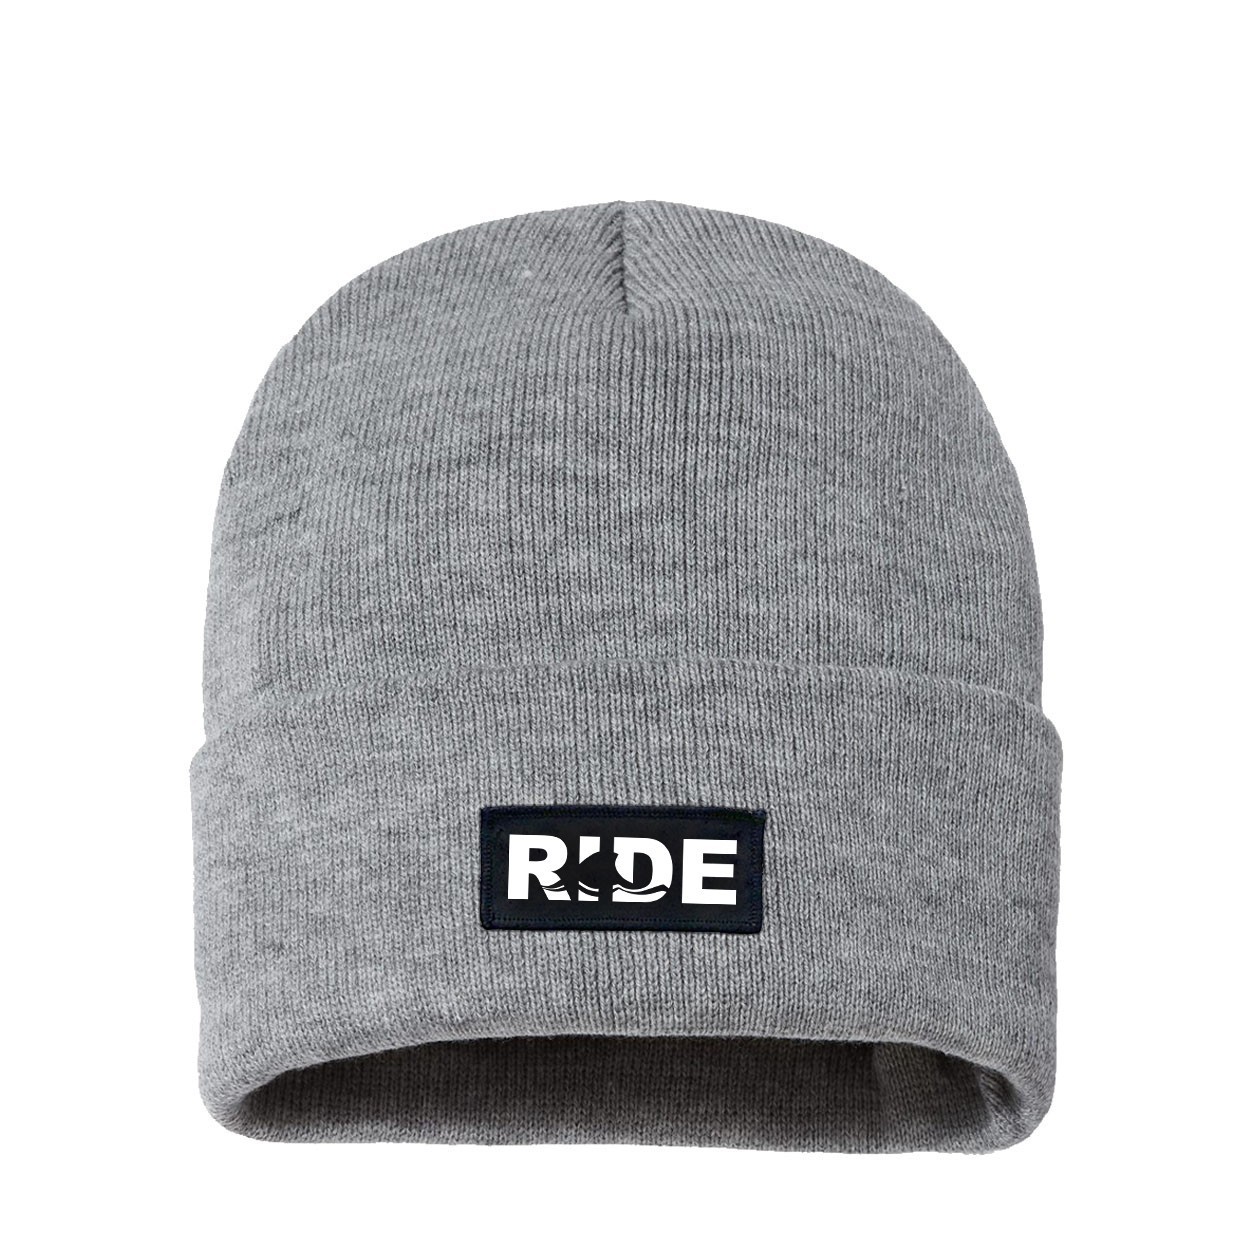 Ride Wave Logo Night Out Woven Patch Night Out Sherpa Lined Cuffed Beanie Heather Gray (White Logo)